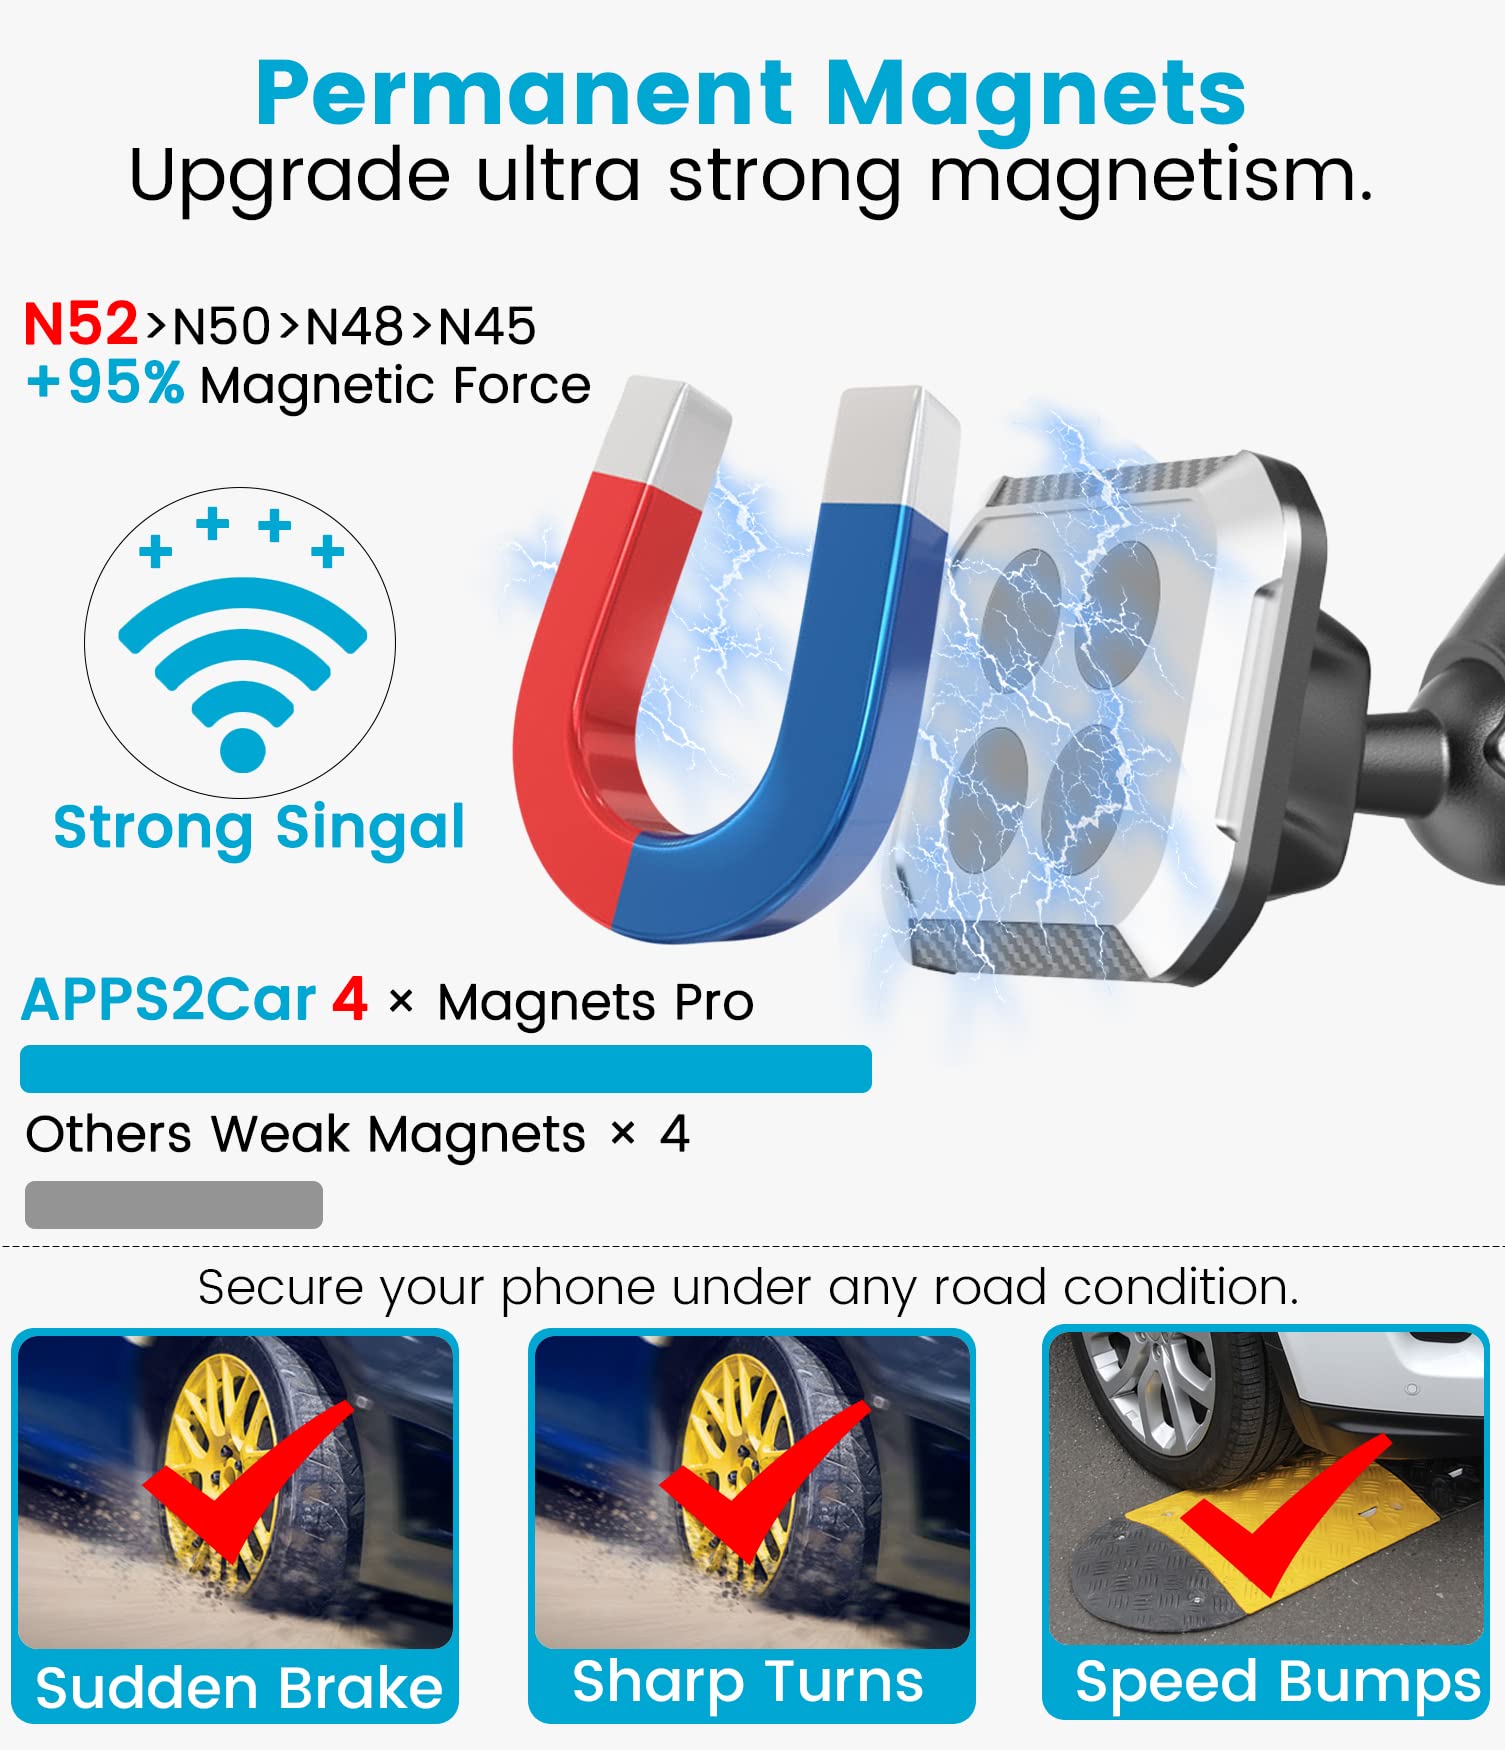 APPS2Car Magnetic Phone Car Mount Rear View Mirror Phone Holder for Car Long Arm Low Profile Strong Magnets Adjustable Angles & Heights for All Cell Phones, iPhone Fits 16-22mm Round Mirror Neck